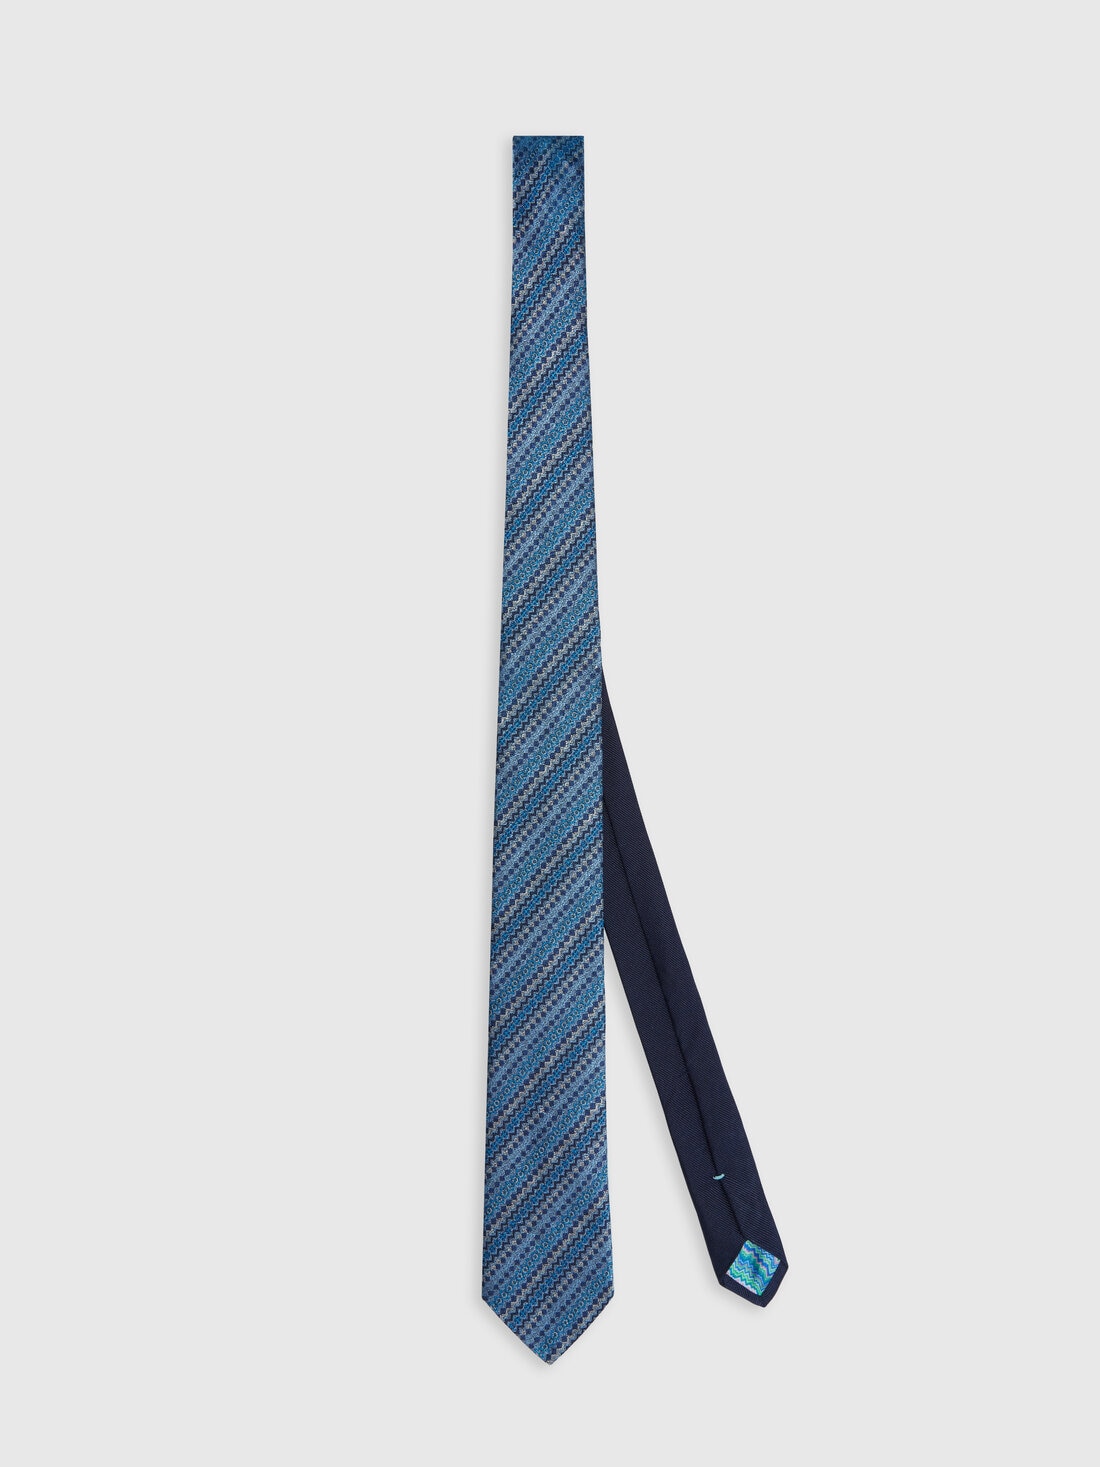 Silk tie knitted with multiple techniques , Multicoloured  - 8053147141893 - 0